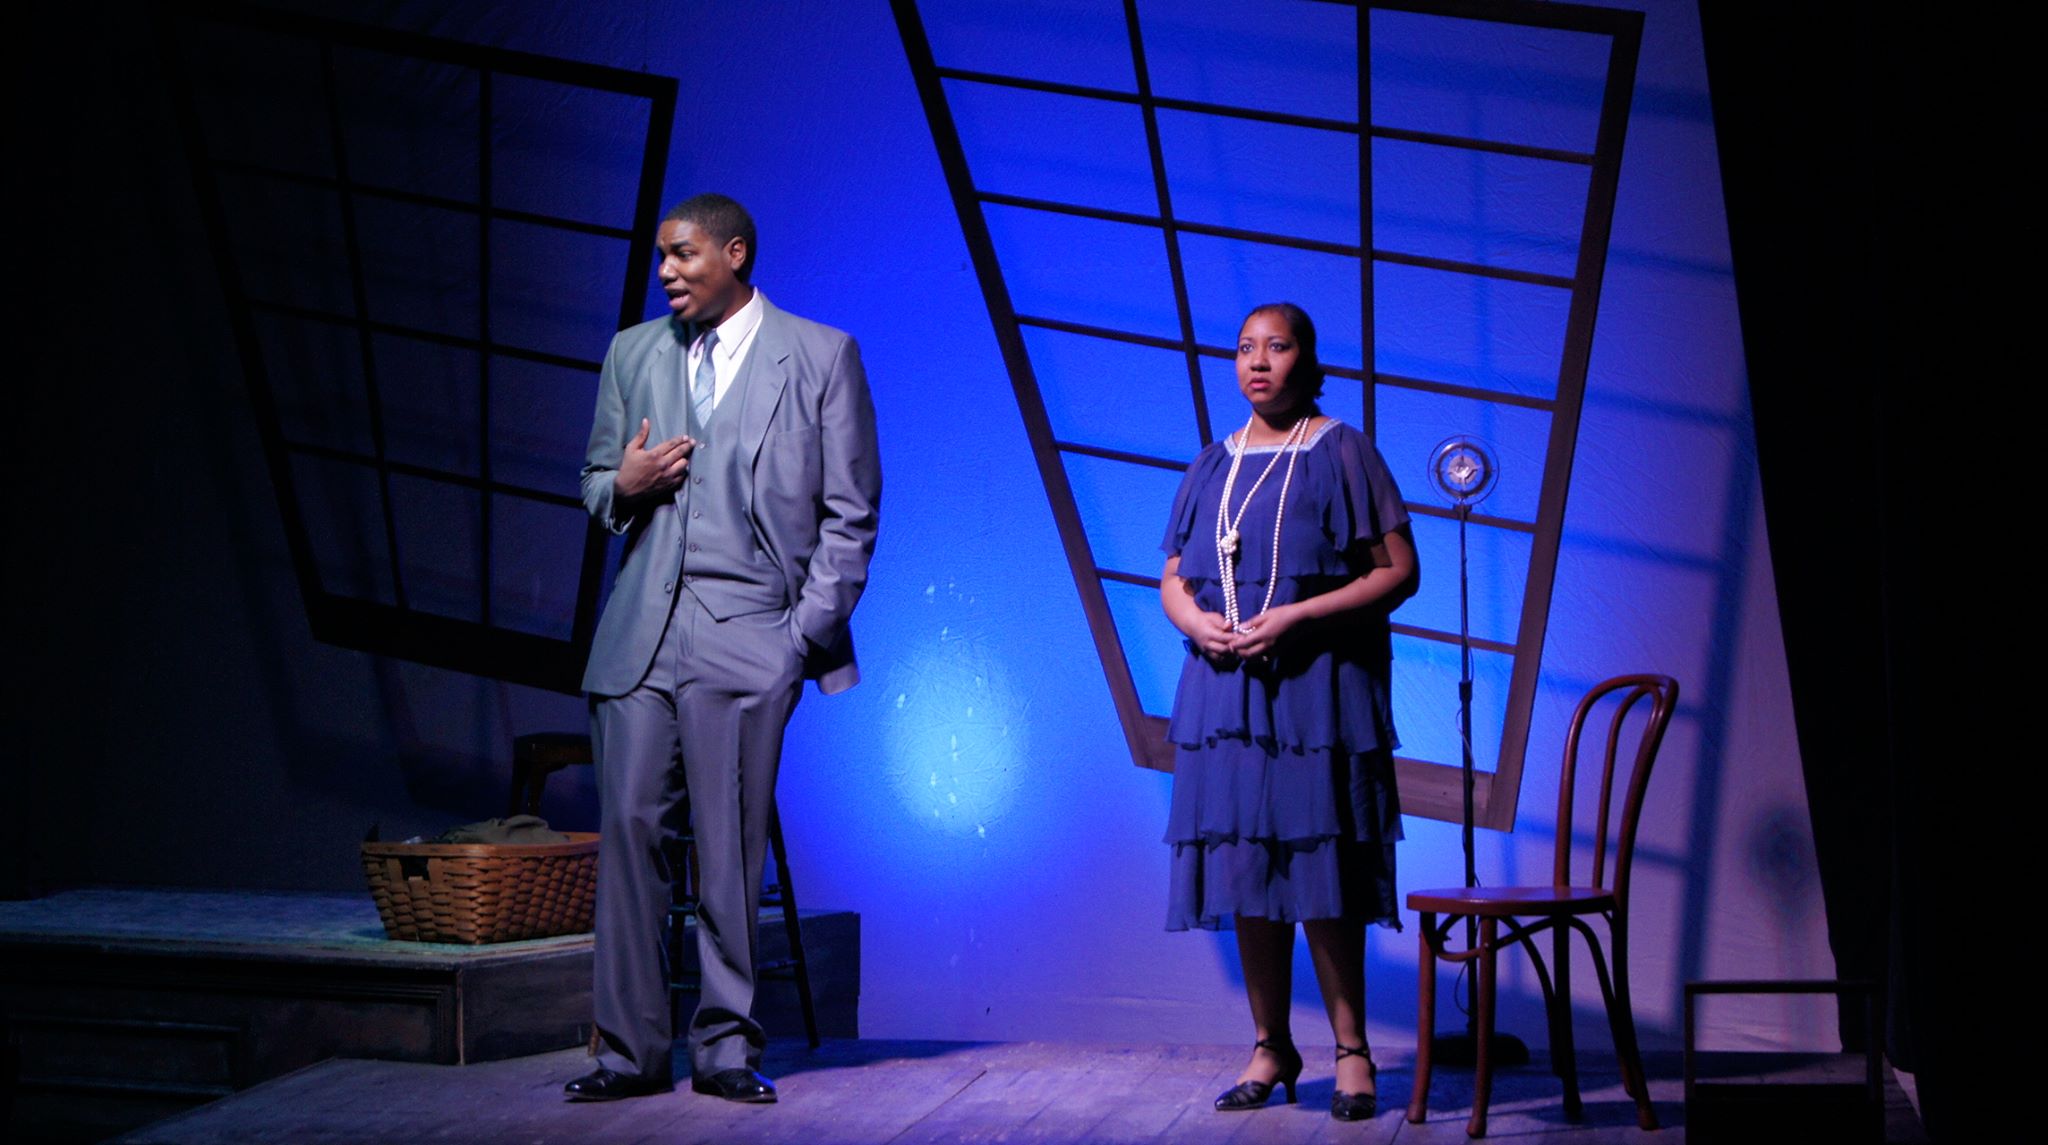 Kyle Carthens as Jimmy Luncefore (left) and Tonya Broach as Lenora (right) in Charles Smith's play 